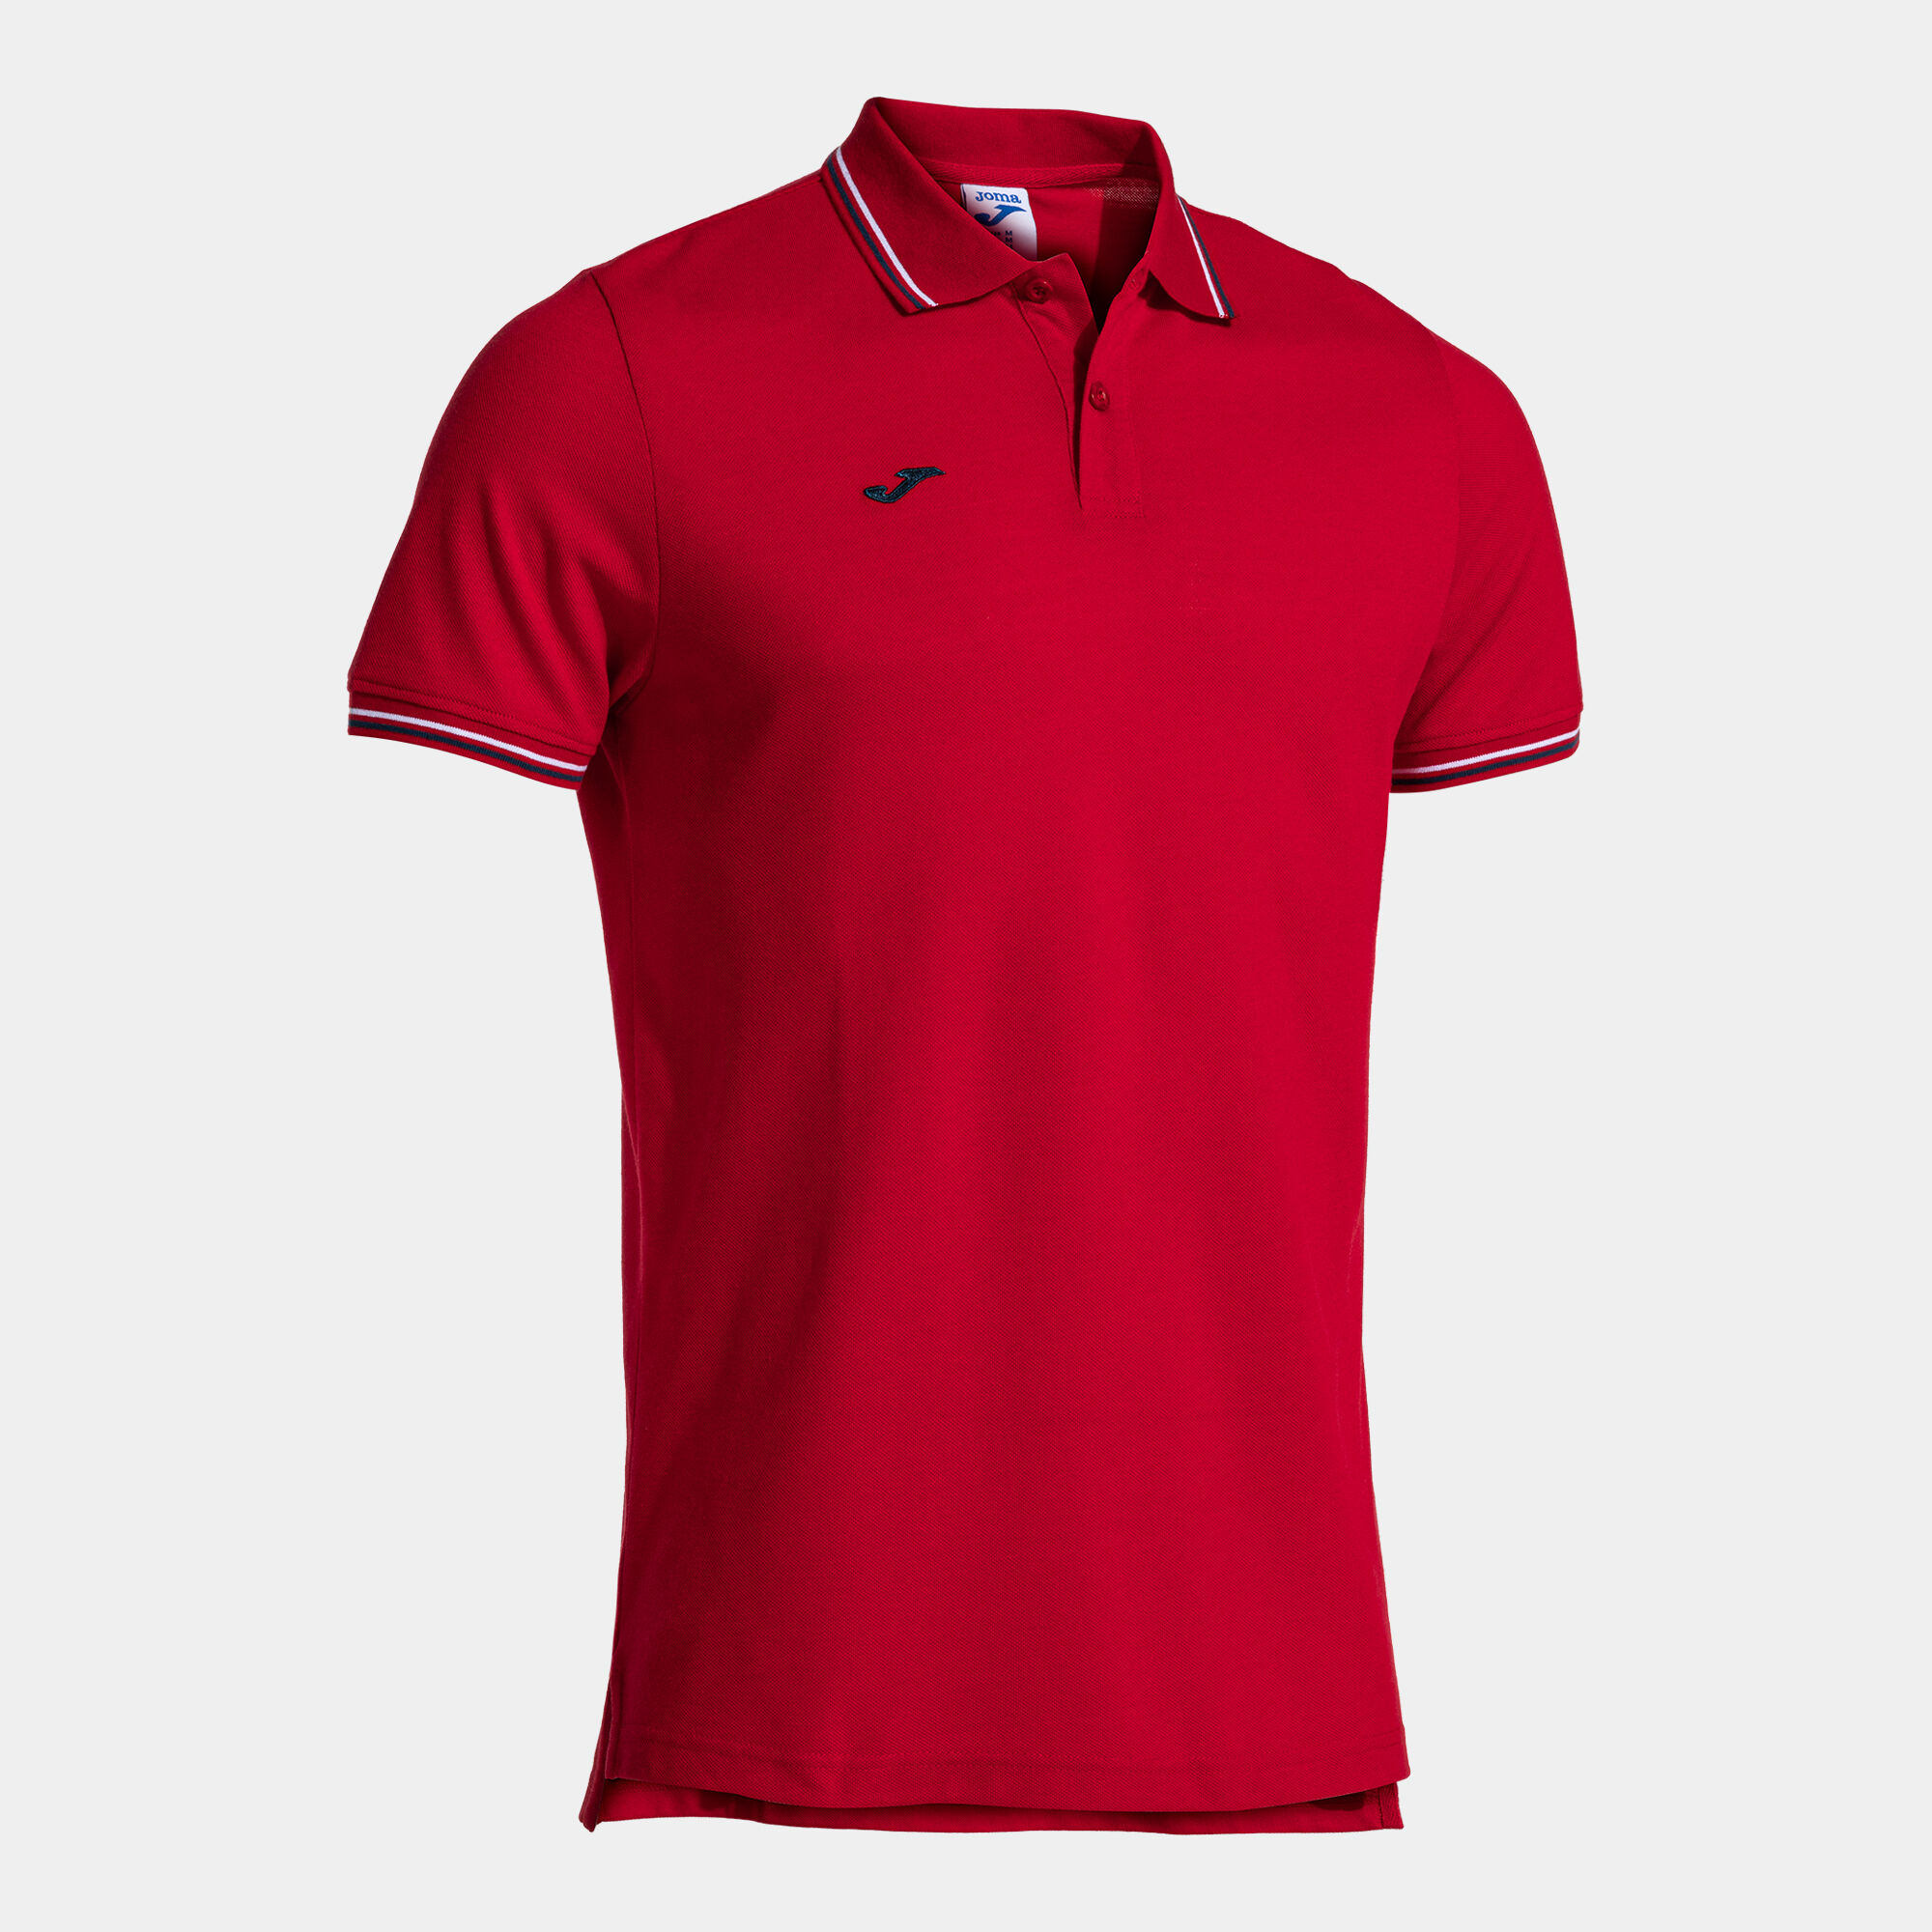 Polo shirt short-sleeve man Confort Classic red navy blue